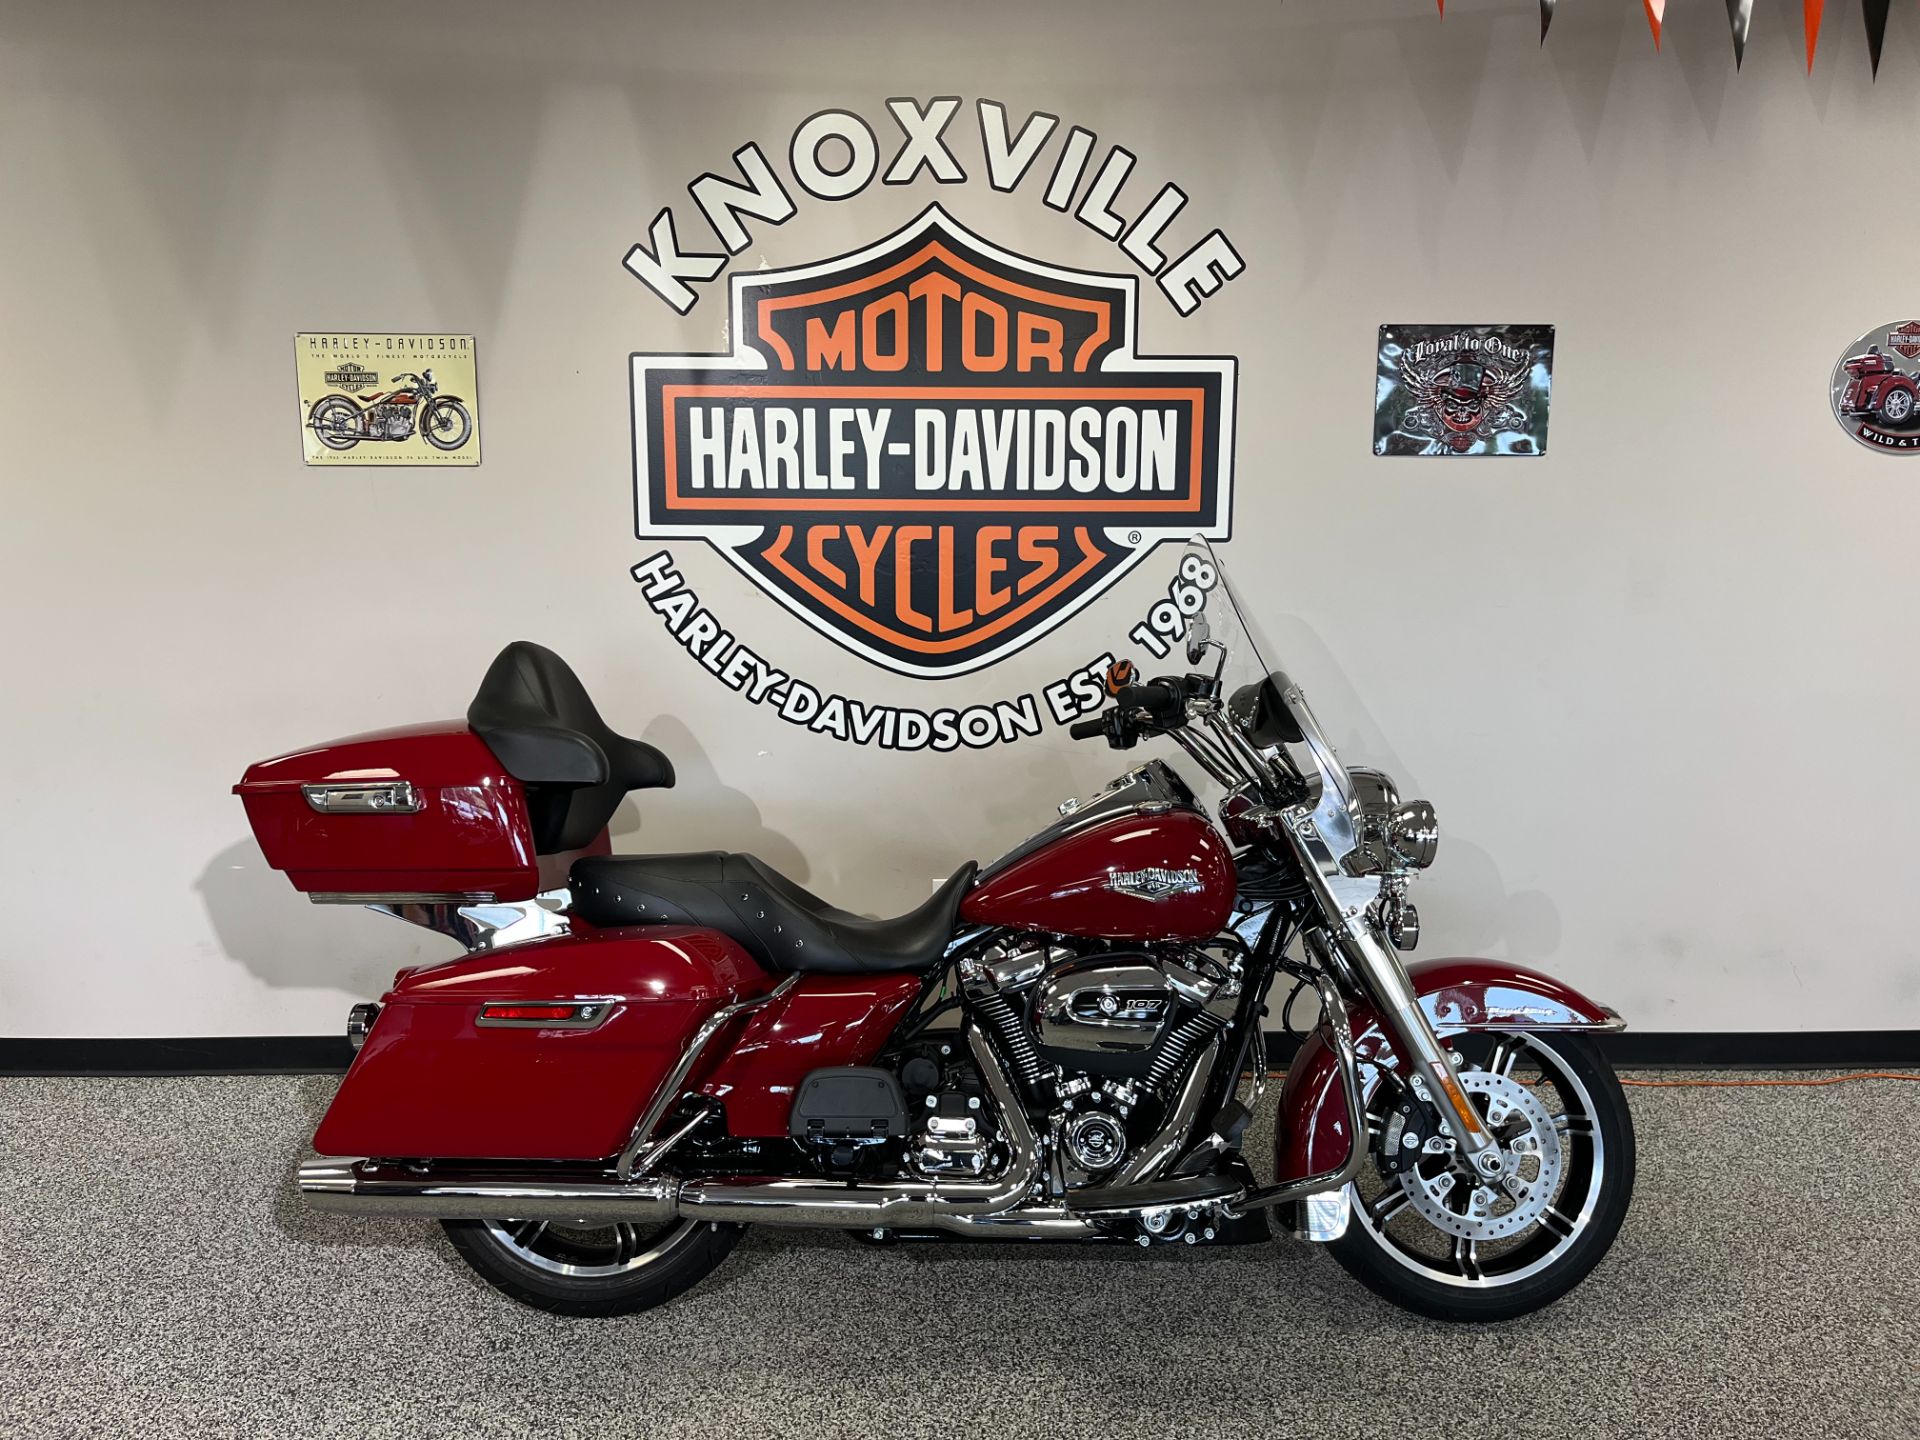 2021 Harley-Davidson ROAD KING in Knoxville, Tennessee - Photo 1